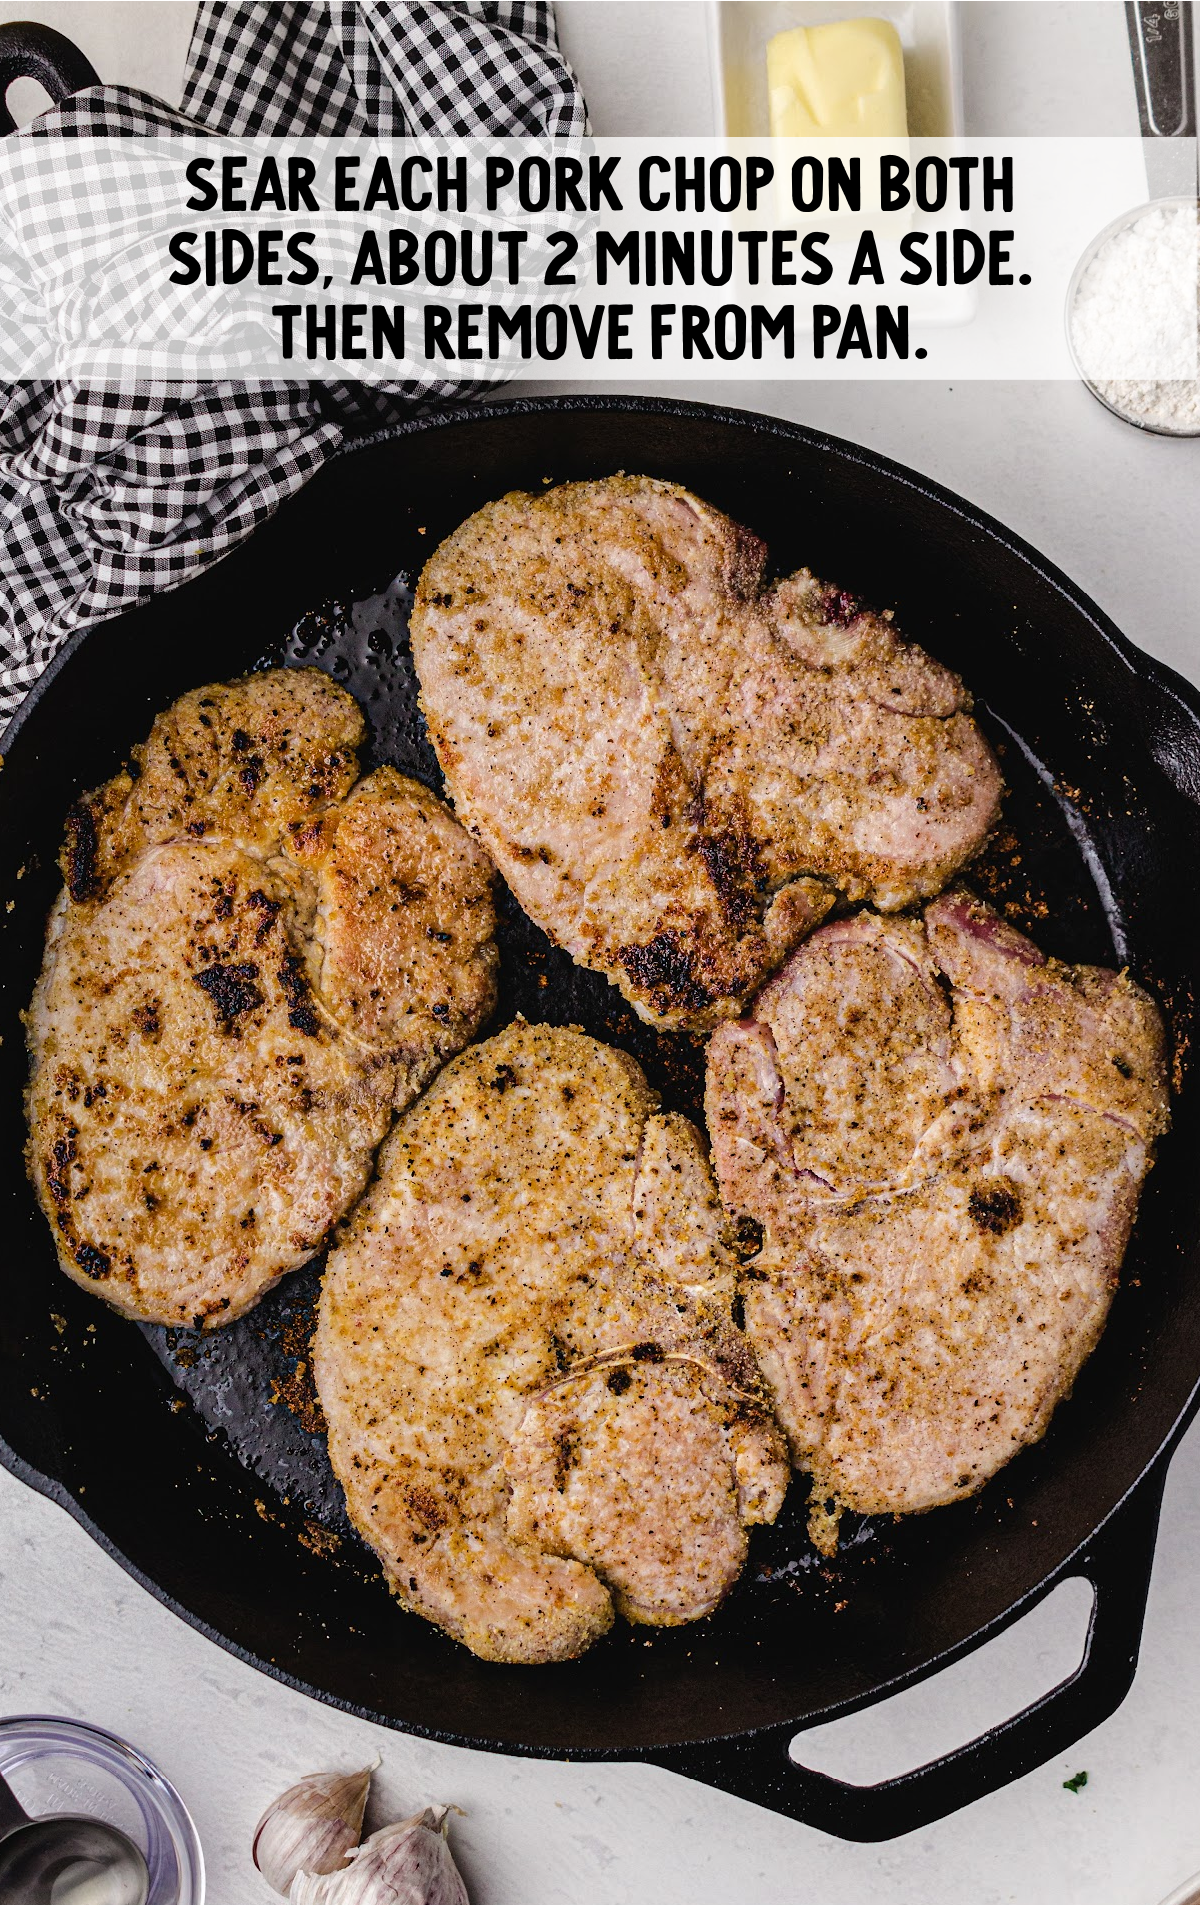 Four pork chops searing in a hot iron skillet.